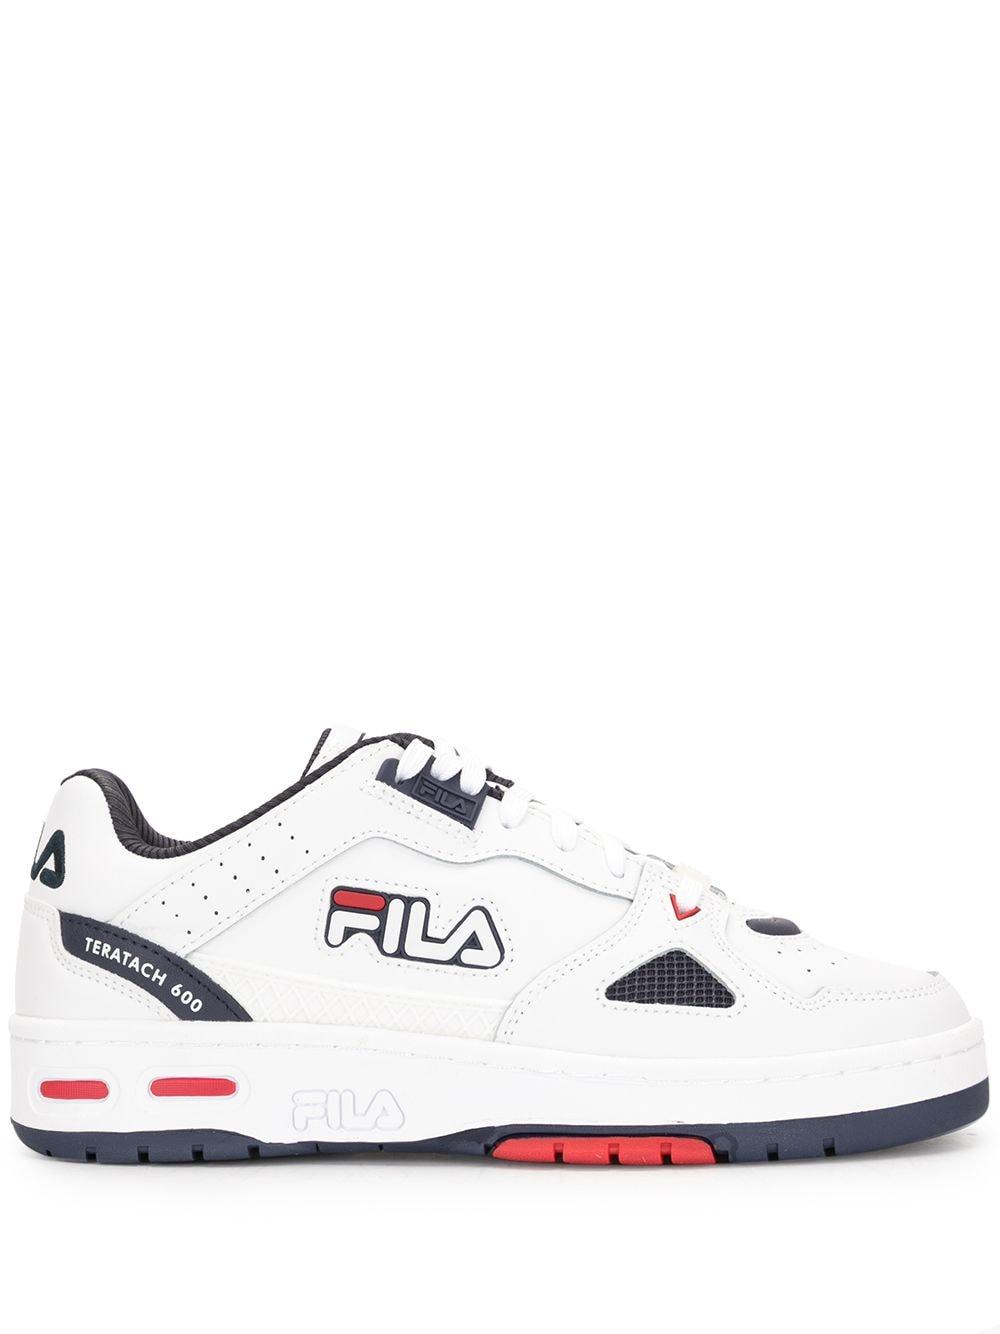 fila teratach 600 sneaker Online Sale, UP TO 61% OFF